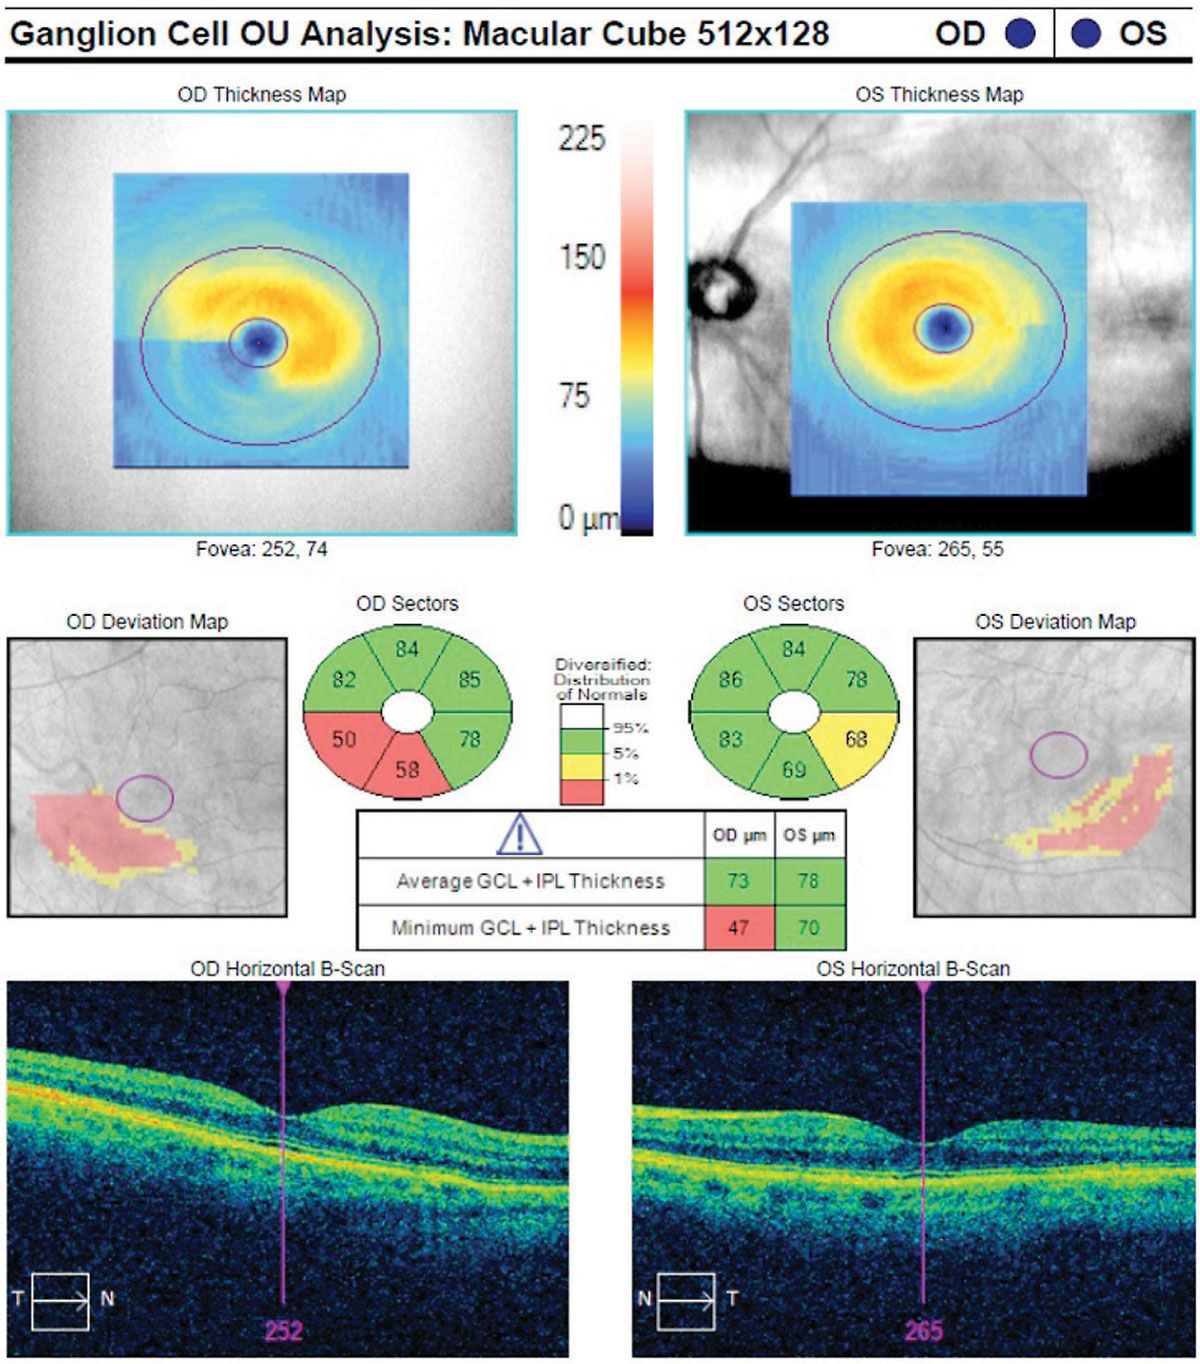 While the study did not find a significant cross-sectional difference in GC-IPL thickness between patients with Parkinson’s and control patients, those with the condition had a significantly greater rate of GC-IPL thinning over time. (Image shows GC-IPL thinning in a glaucoma patient.)